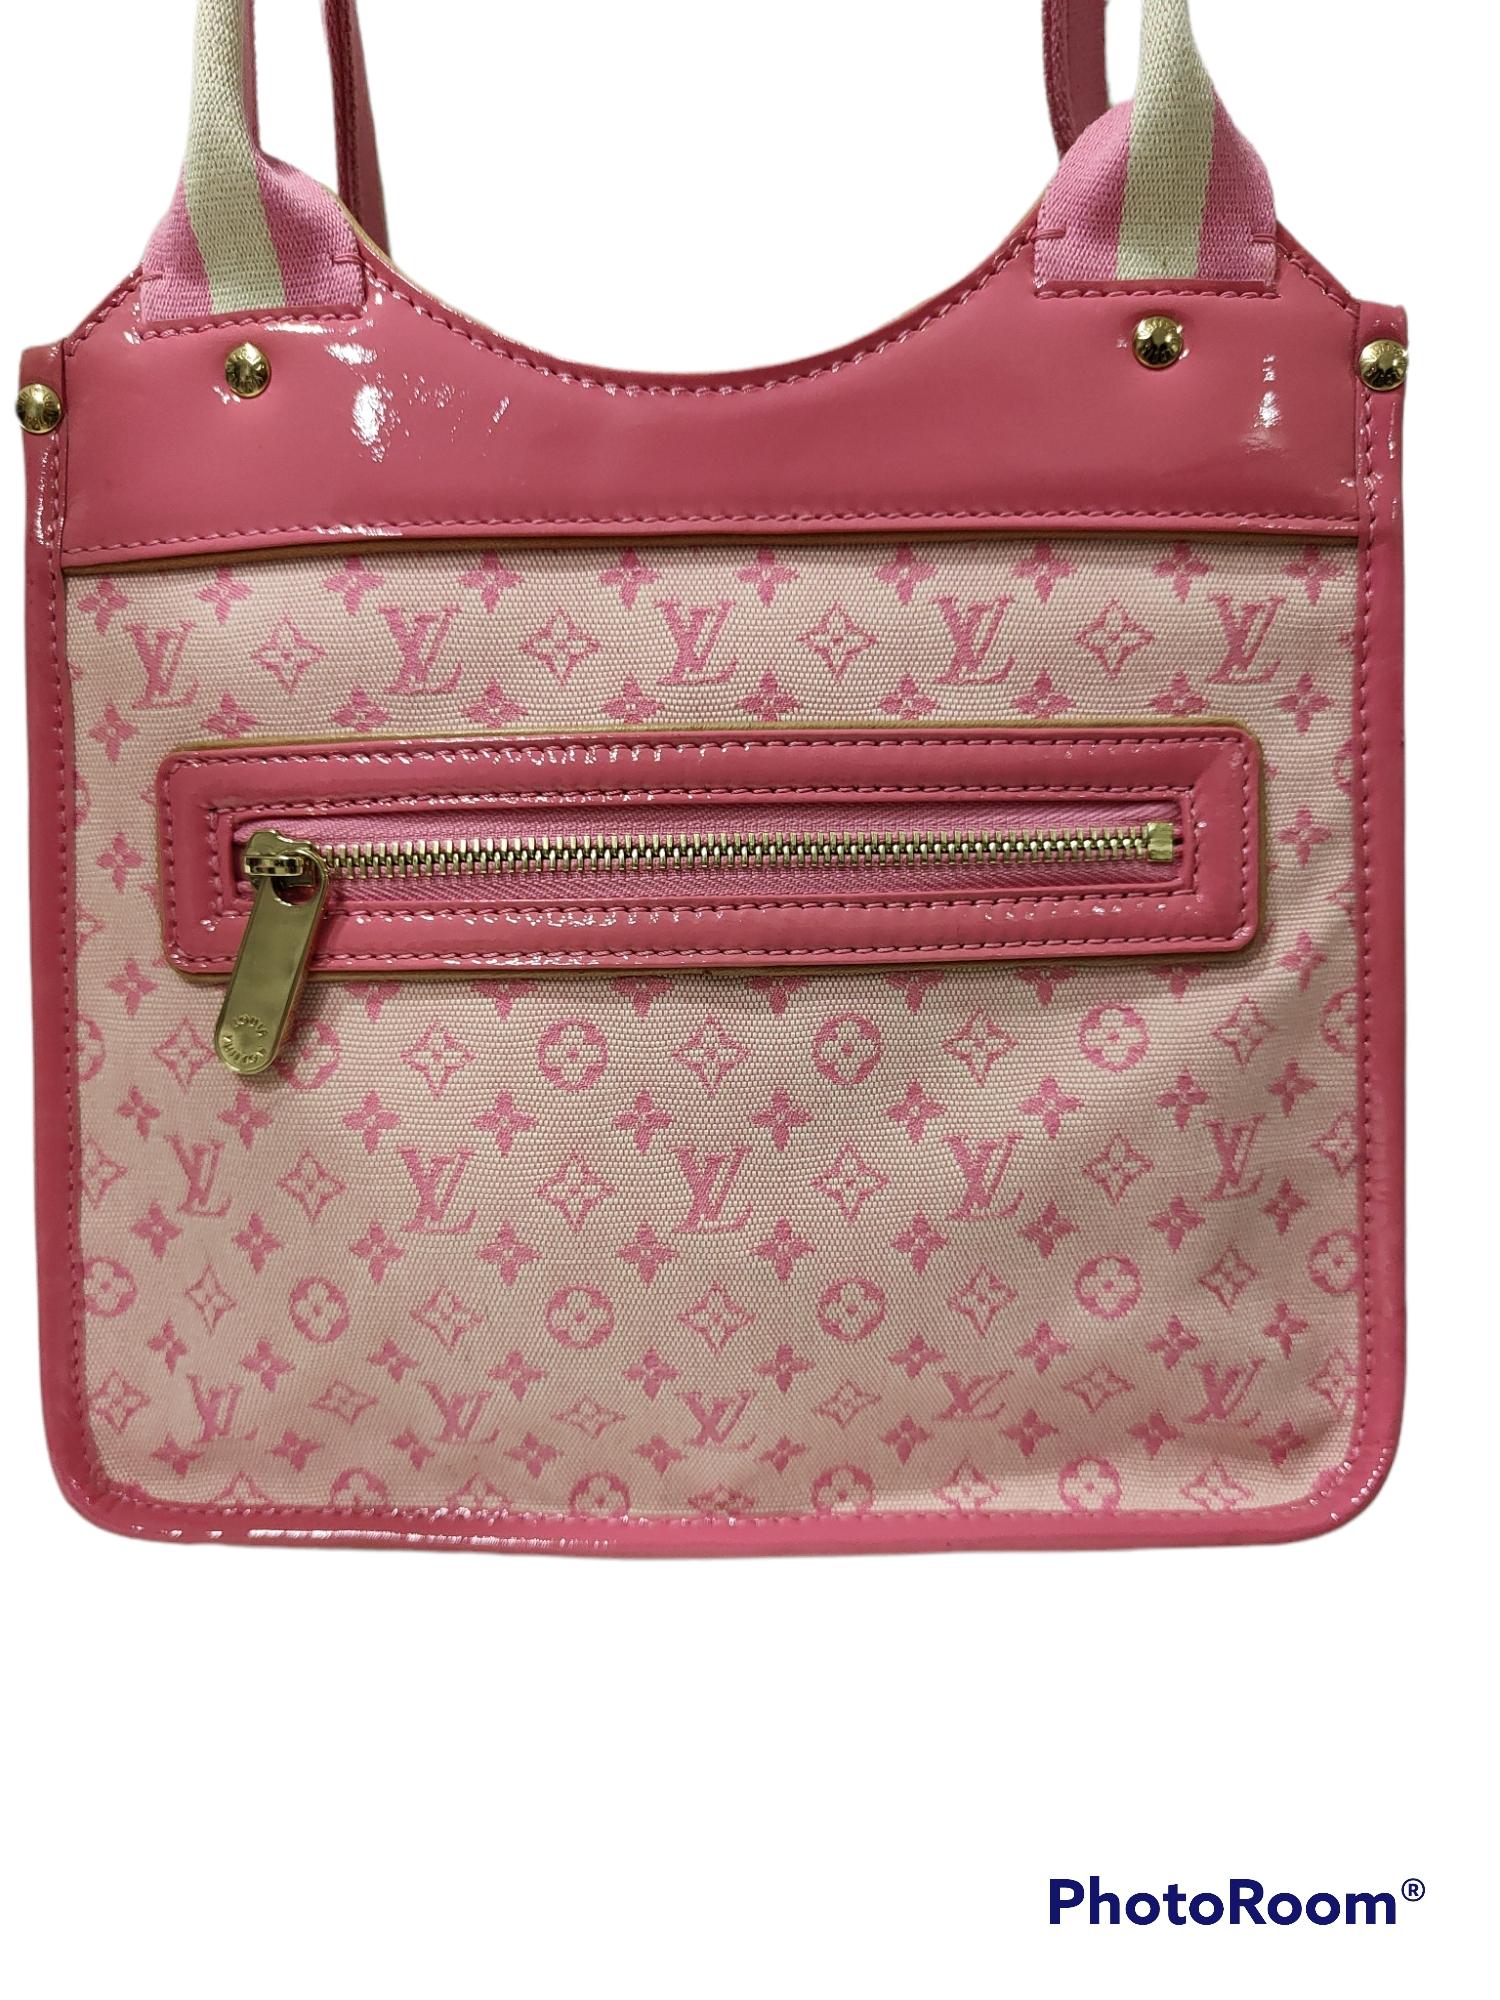 A trendy and fun handbag like this one by Louis Vuitton is a must-have accessory. It has dual leather padded handles, an exterior zipper pocket and the iconic LV monogram printed all over. The interior has both a zipper pocket and a cell phone